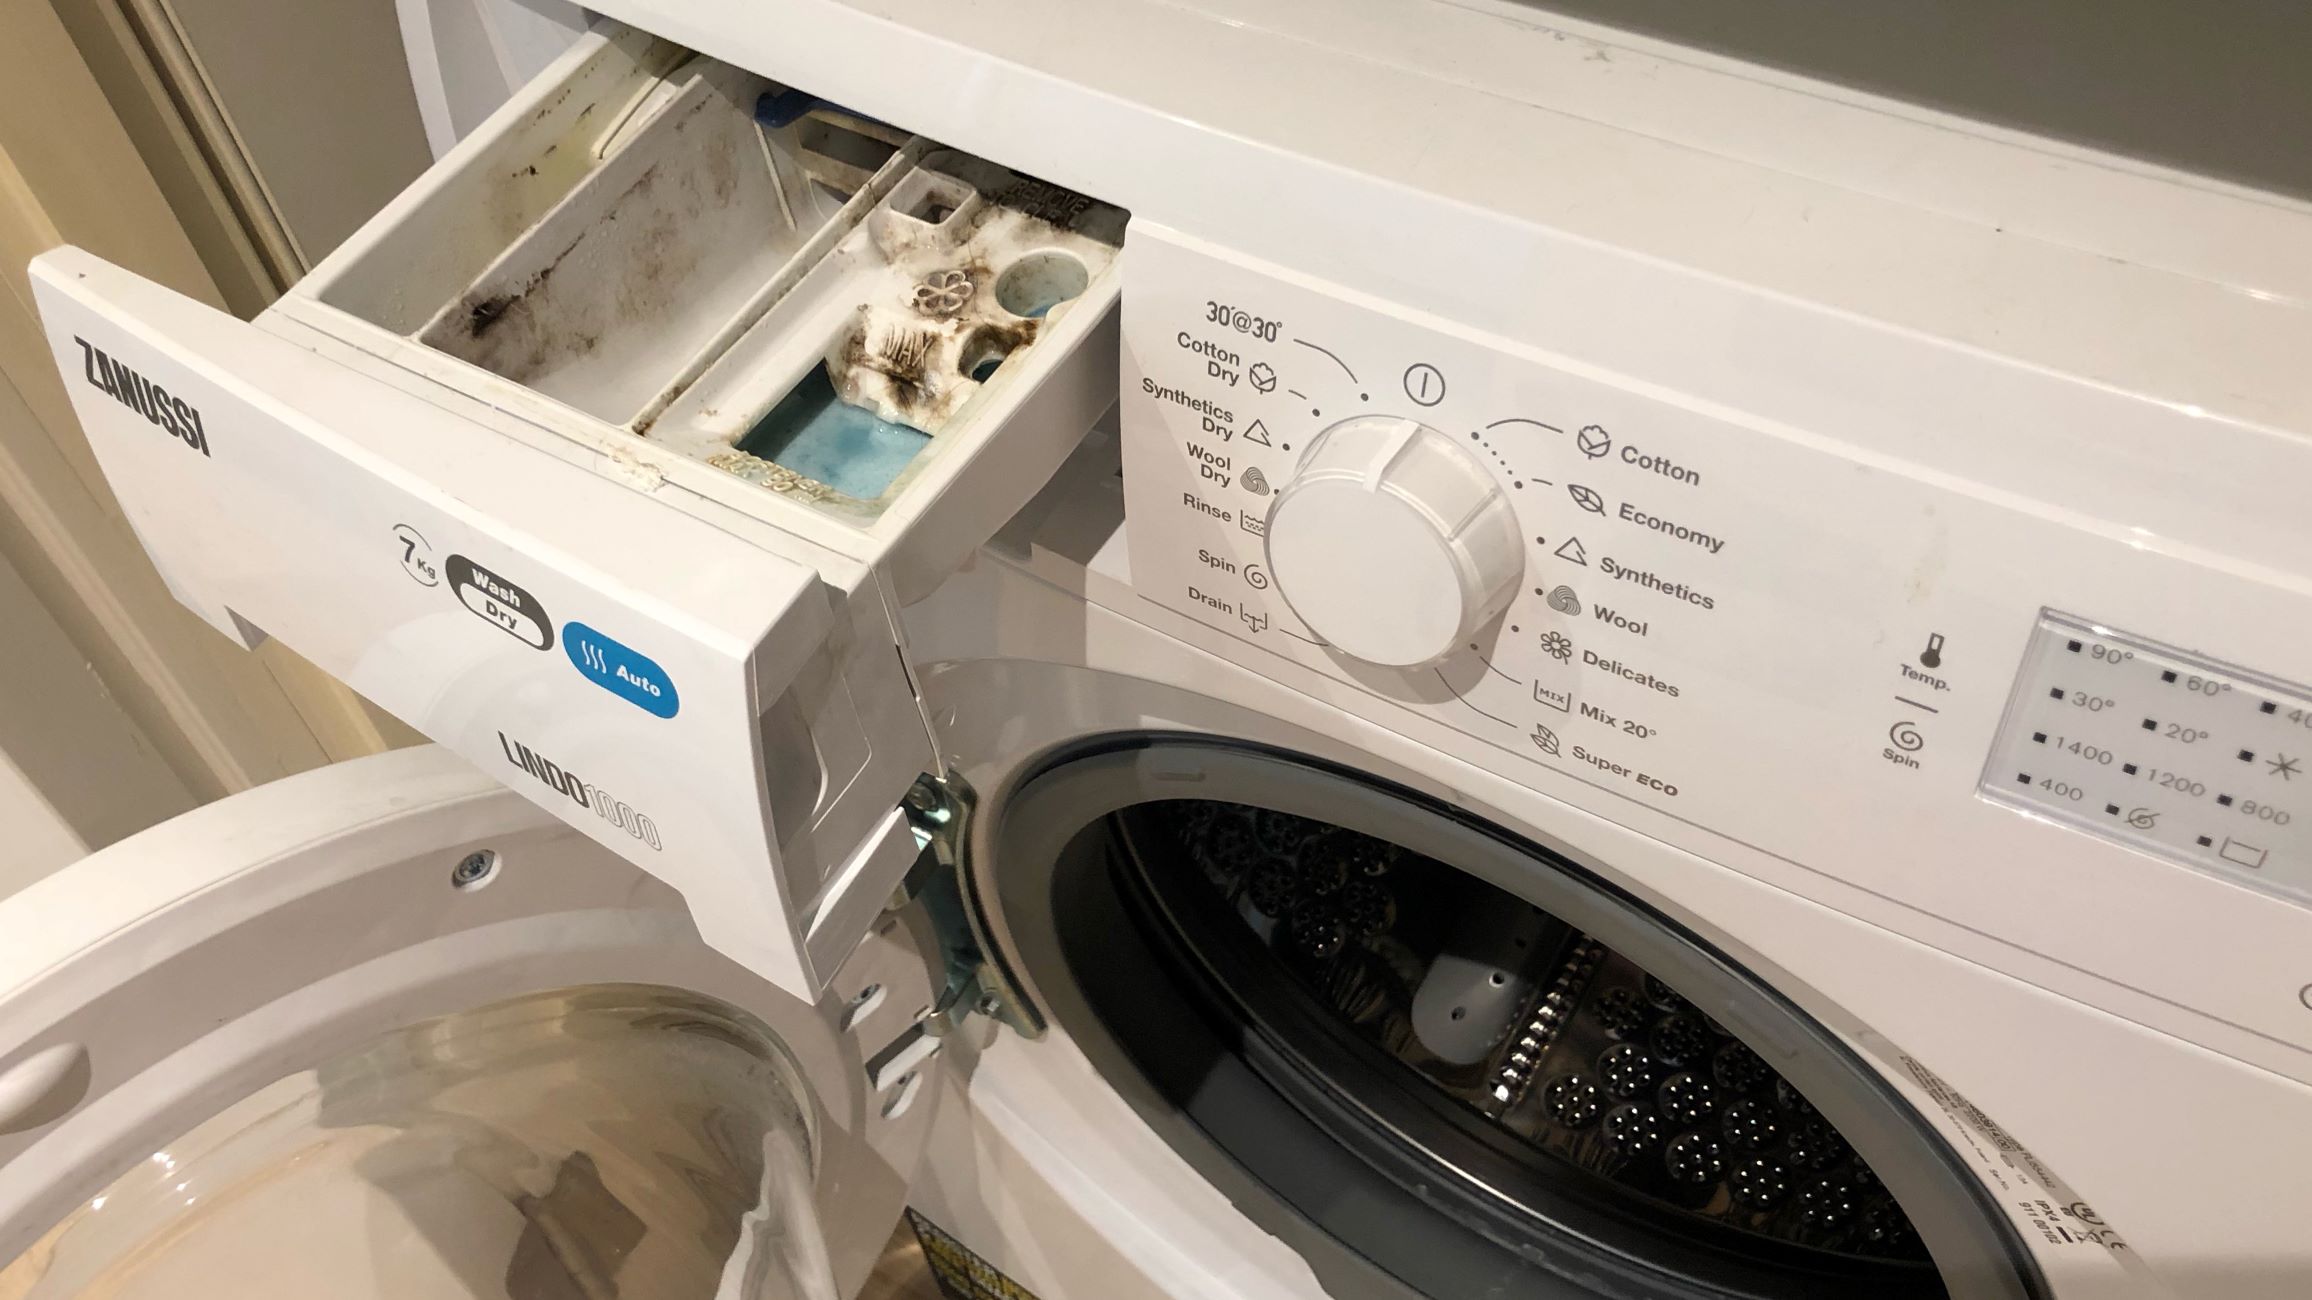 How To Get Rid Of Fabric Softener Build-Up In A Washing Machine